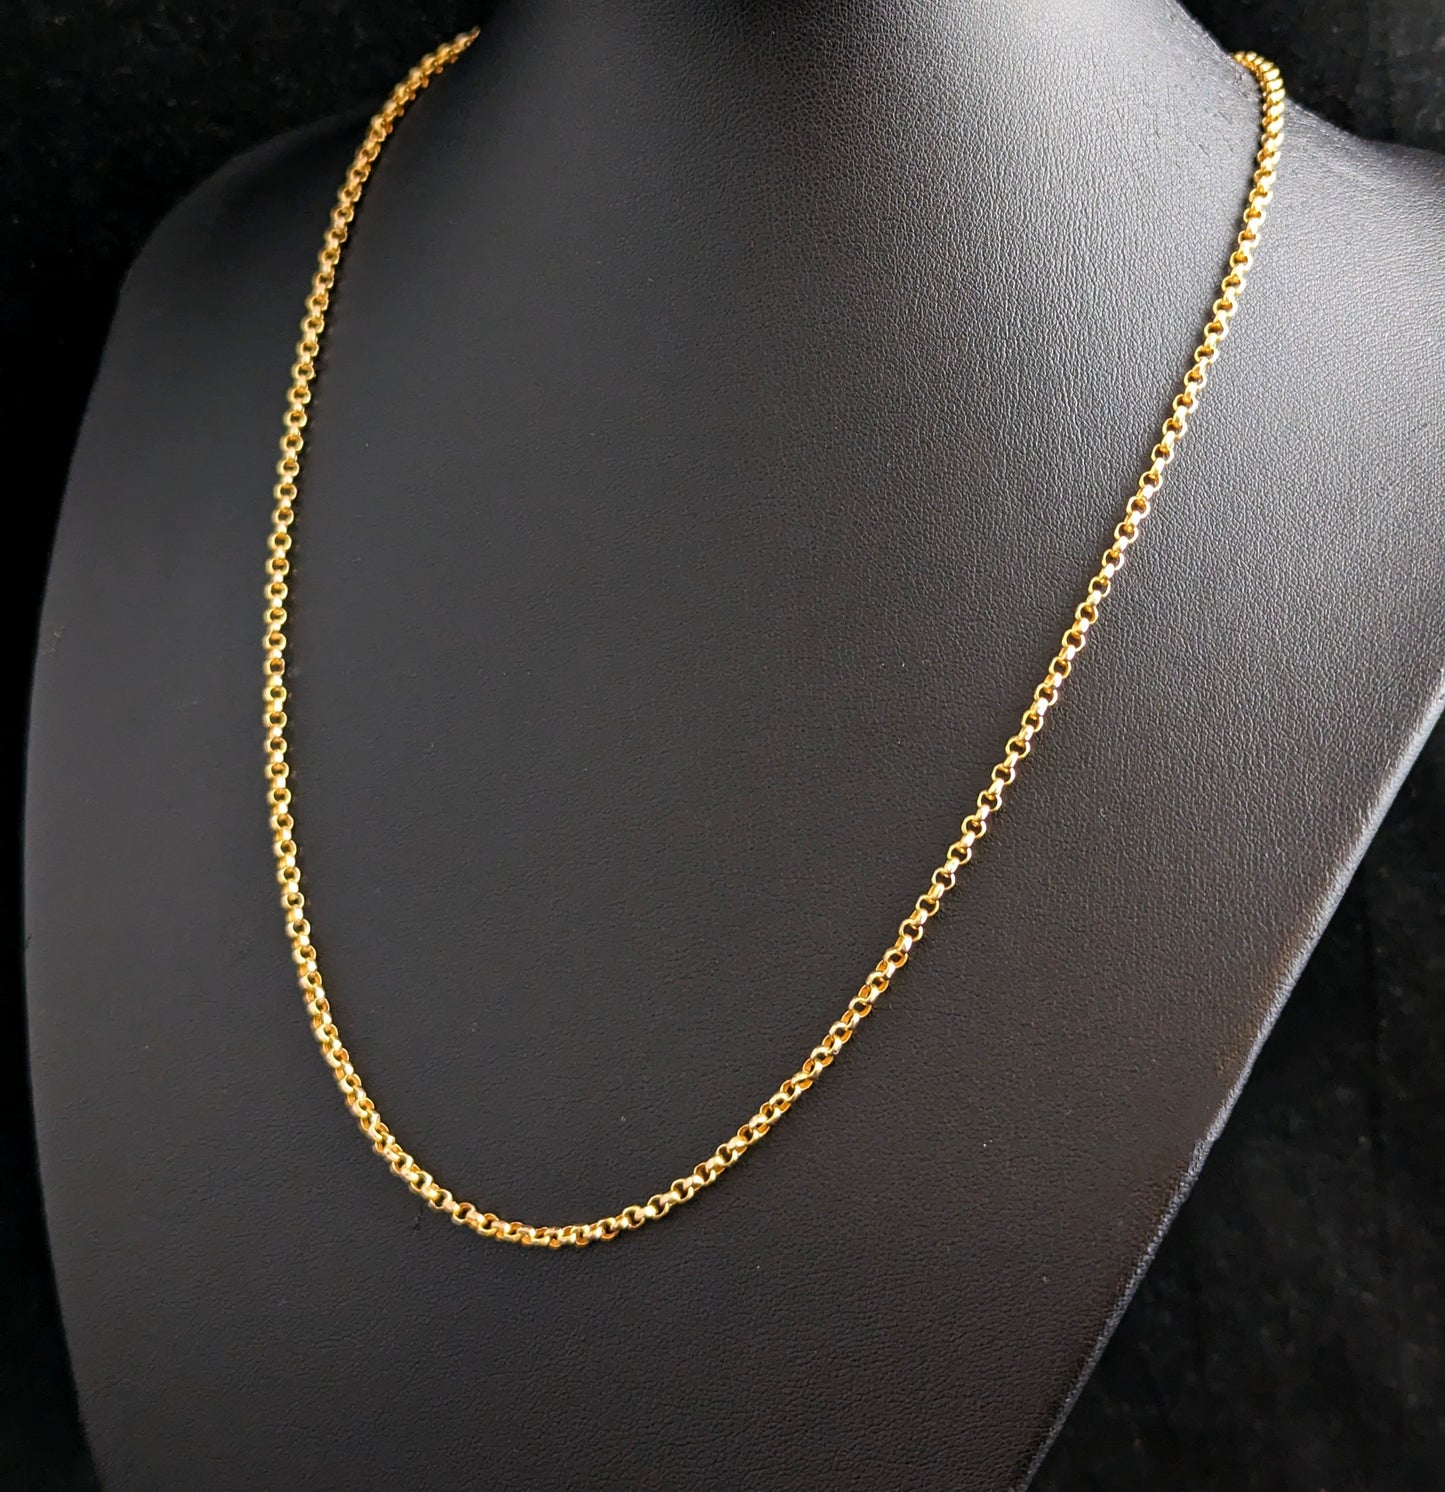 Antique 9ct yellow gold Belcher link chain necklace